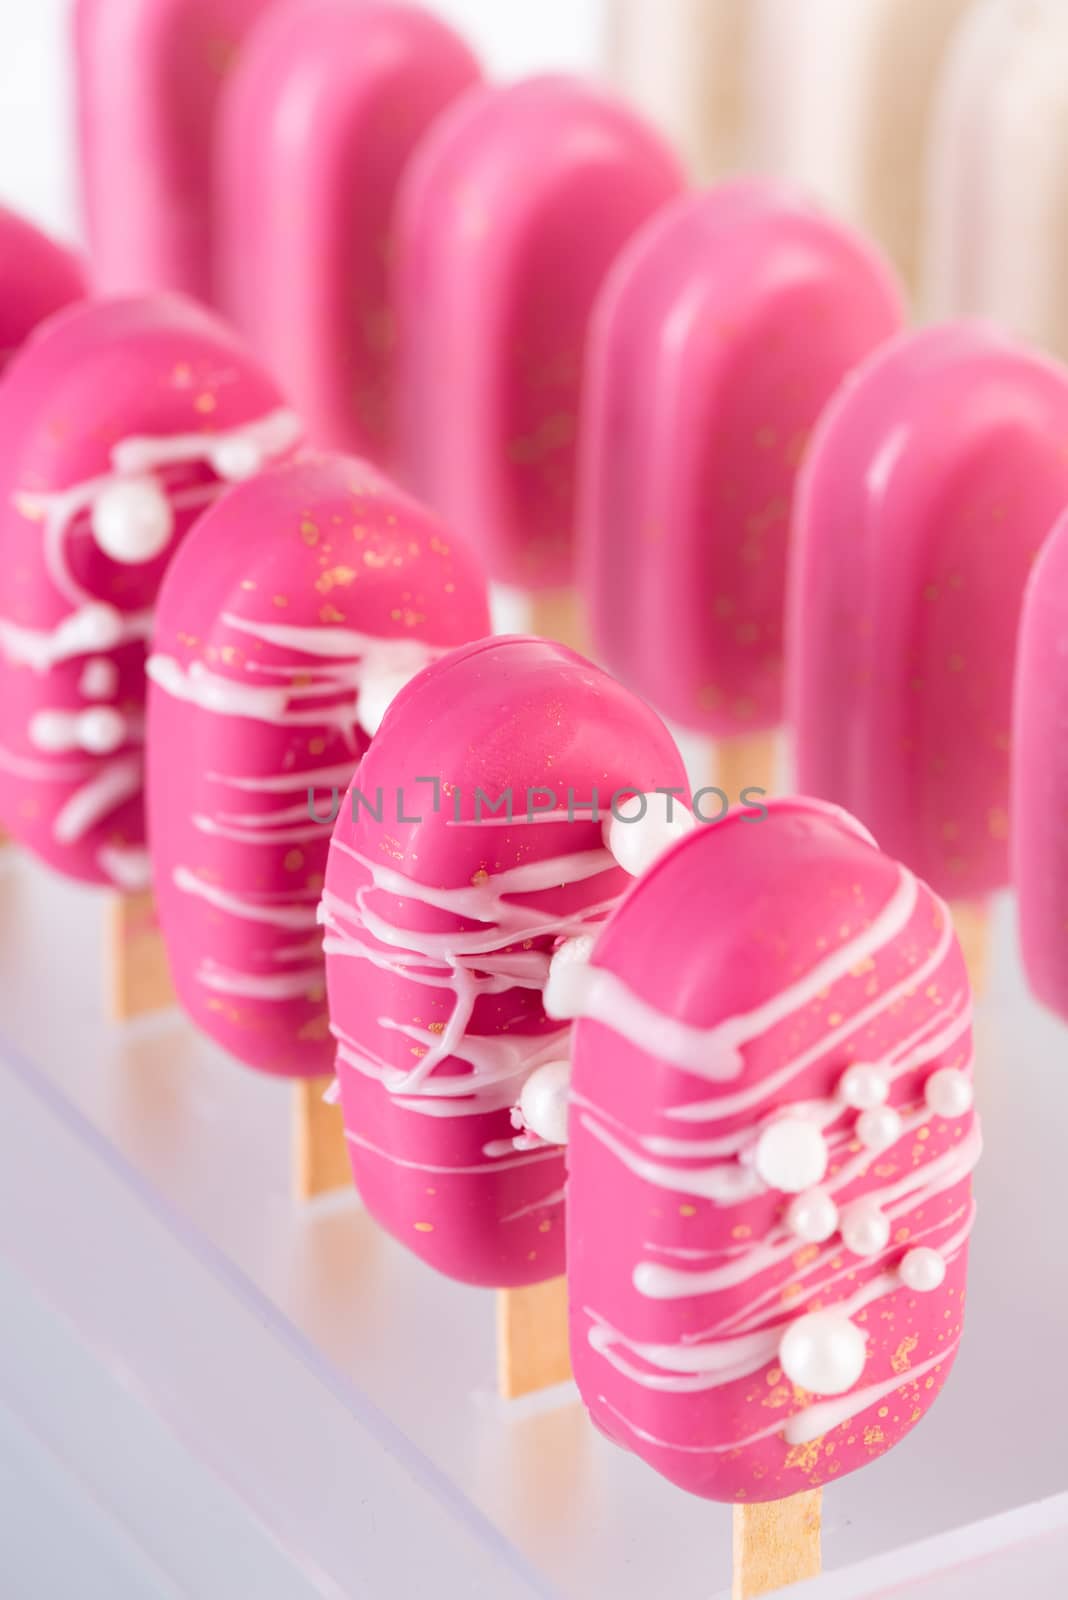 Pink Chocolate Popsicle . Walentines Day or Wedding Reception Food.